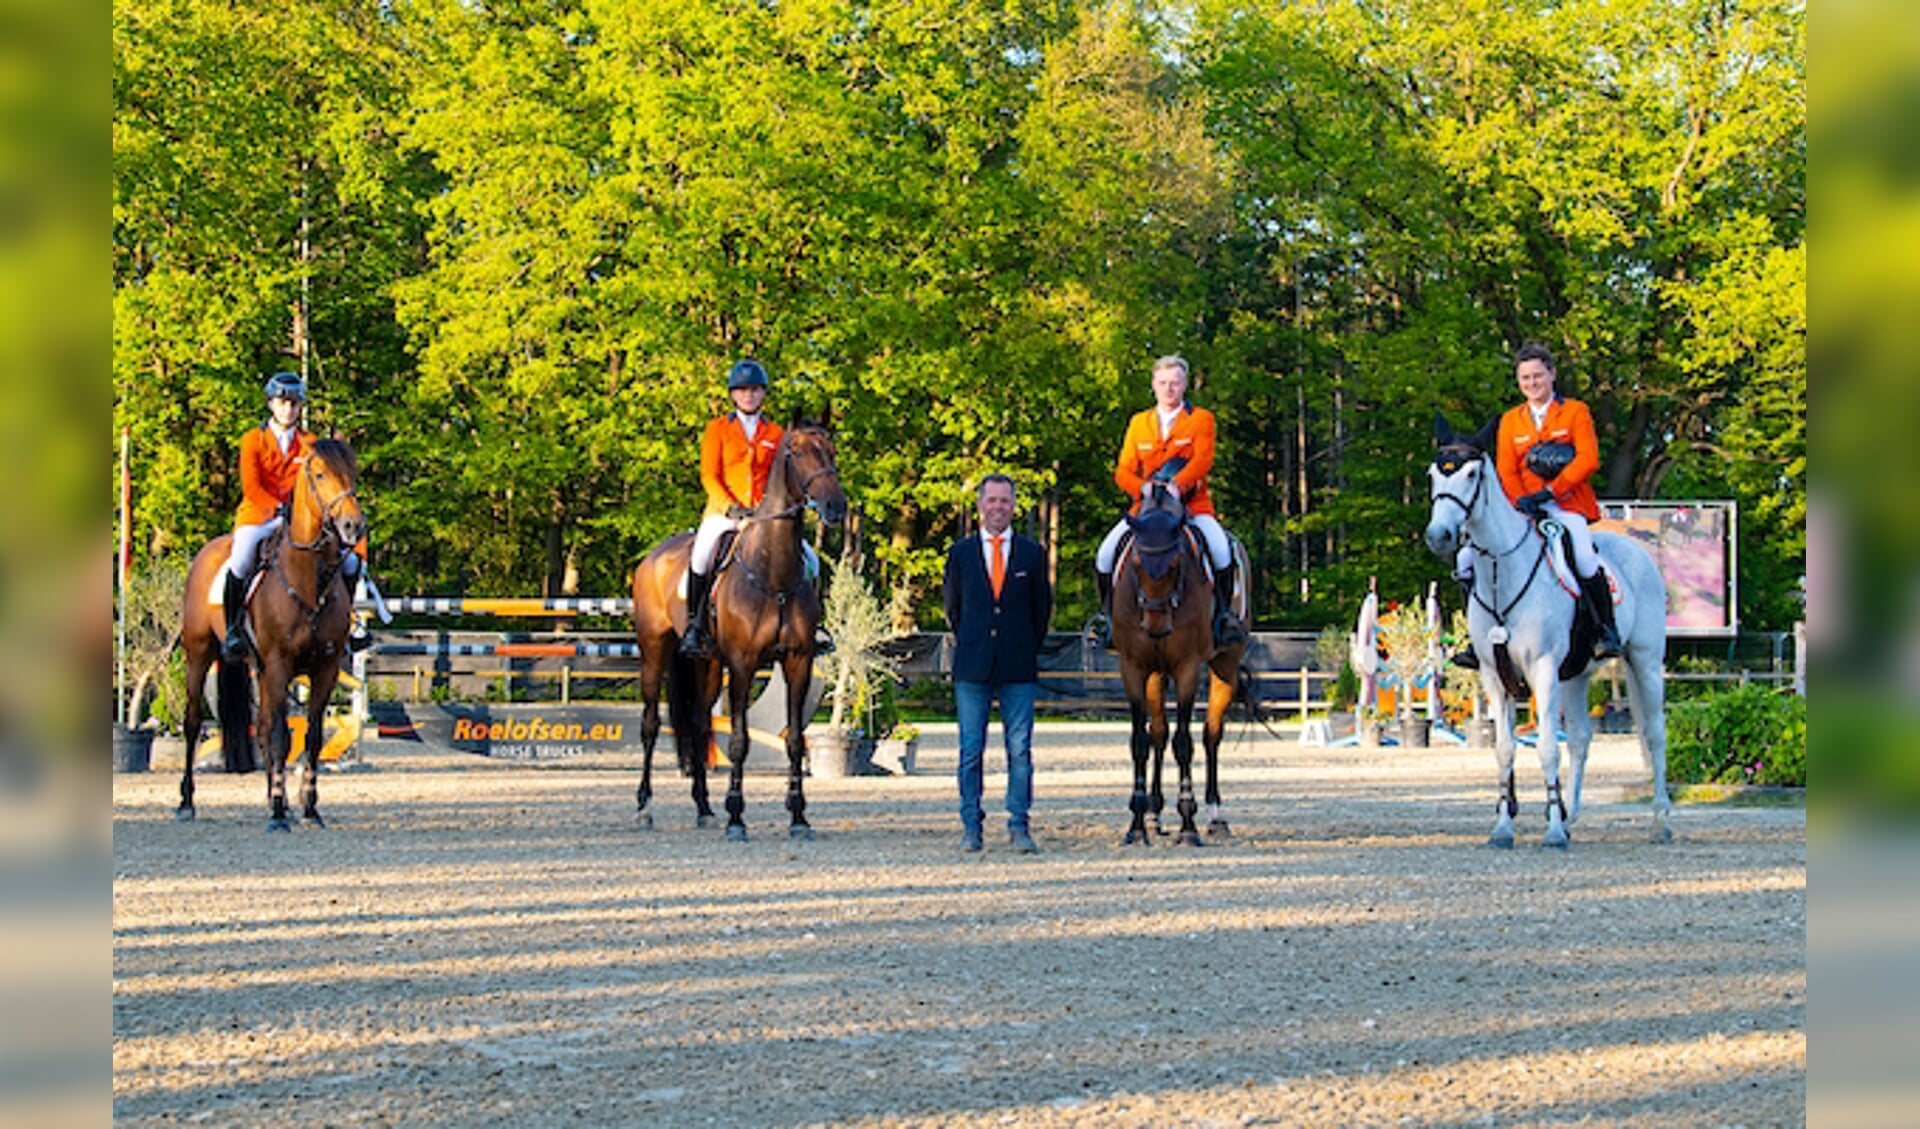 Team Nederland Young Riders
Dutch Youngster Festival 2021
© DigiShots